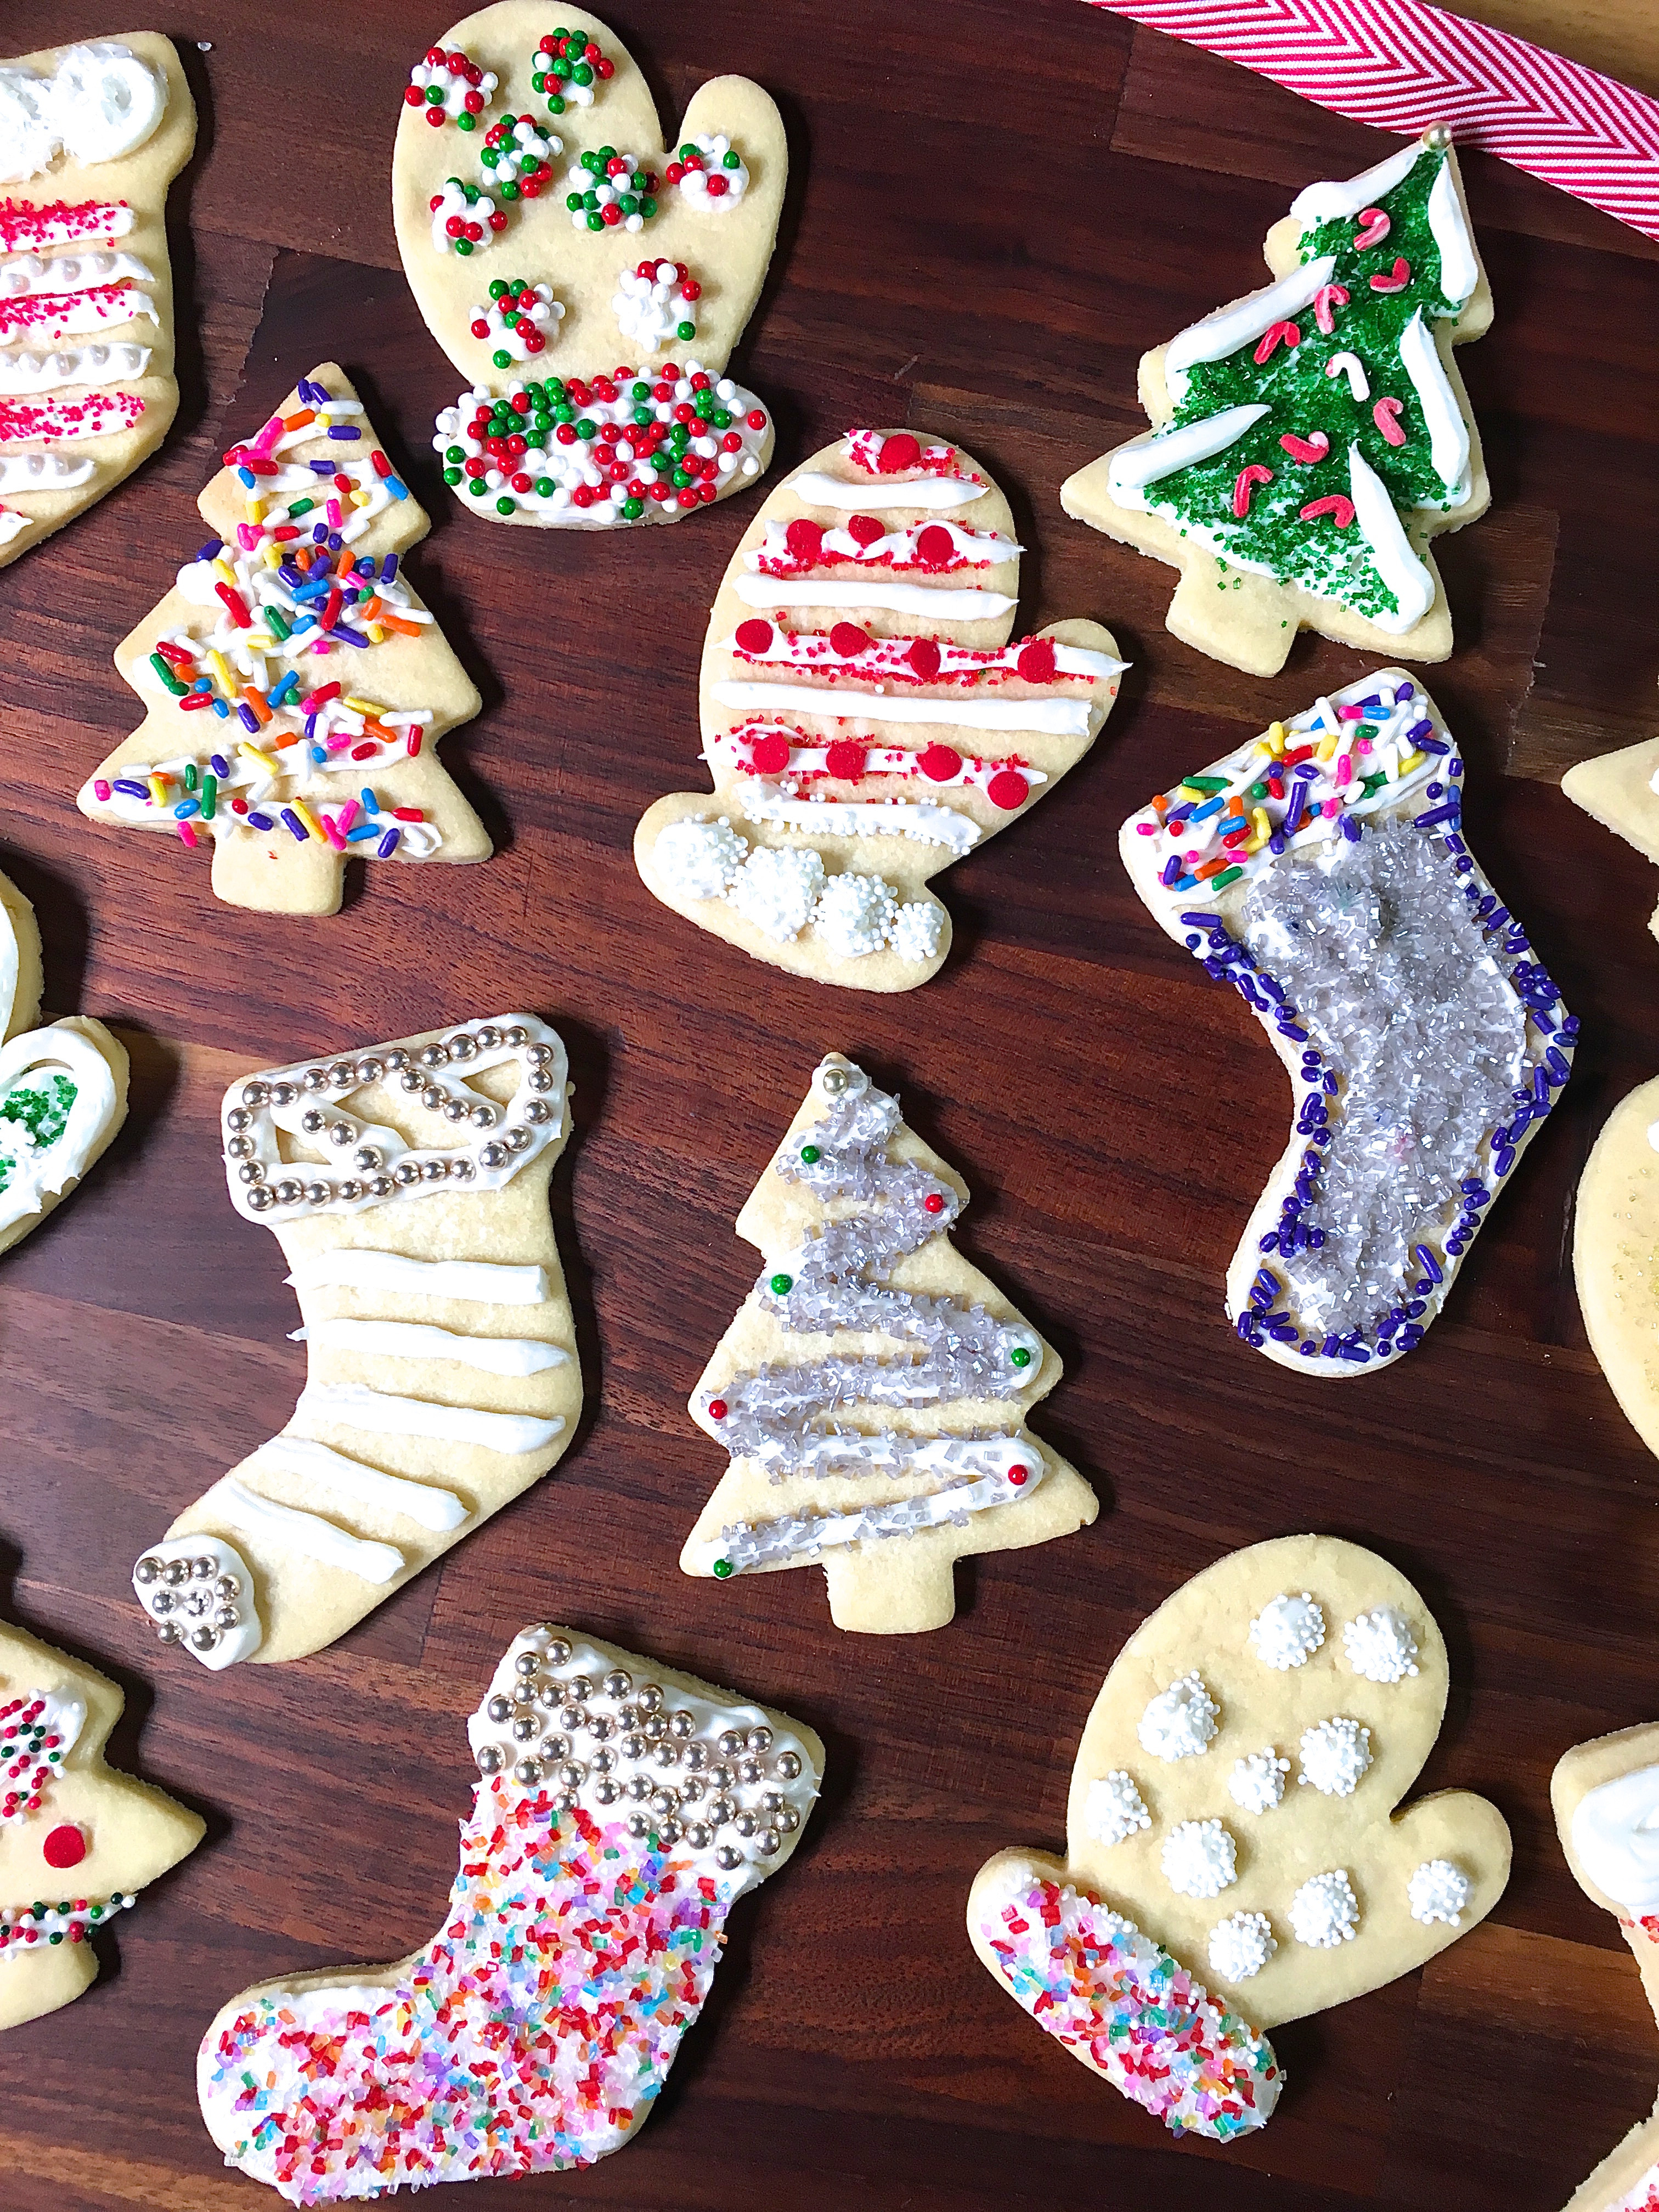 Delish Christmas Cookies
 50 Best Christmas Sugar Cookies Recipes for Easy